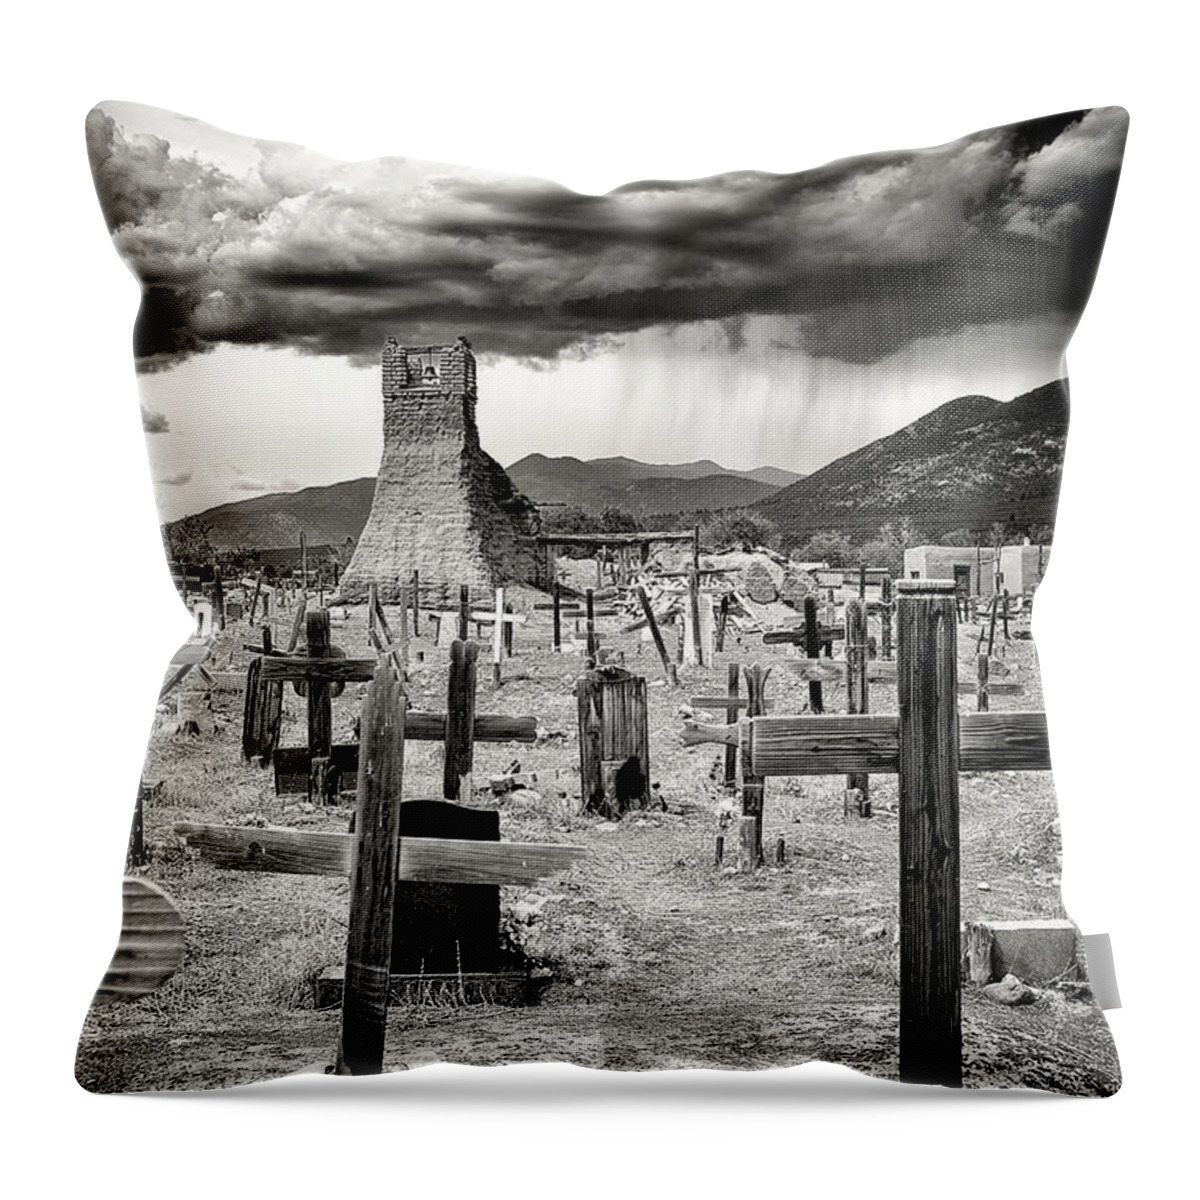 Landscape Throw Pillow featuring the photograph Storm Clouds Over Taos by Ron McGinnis